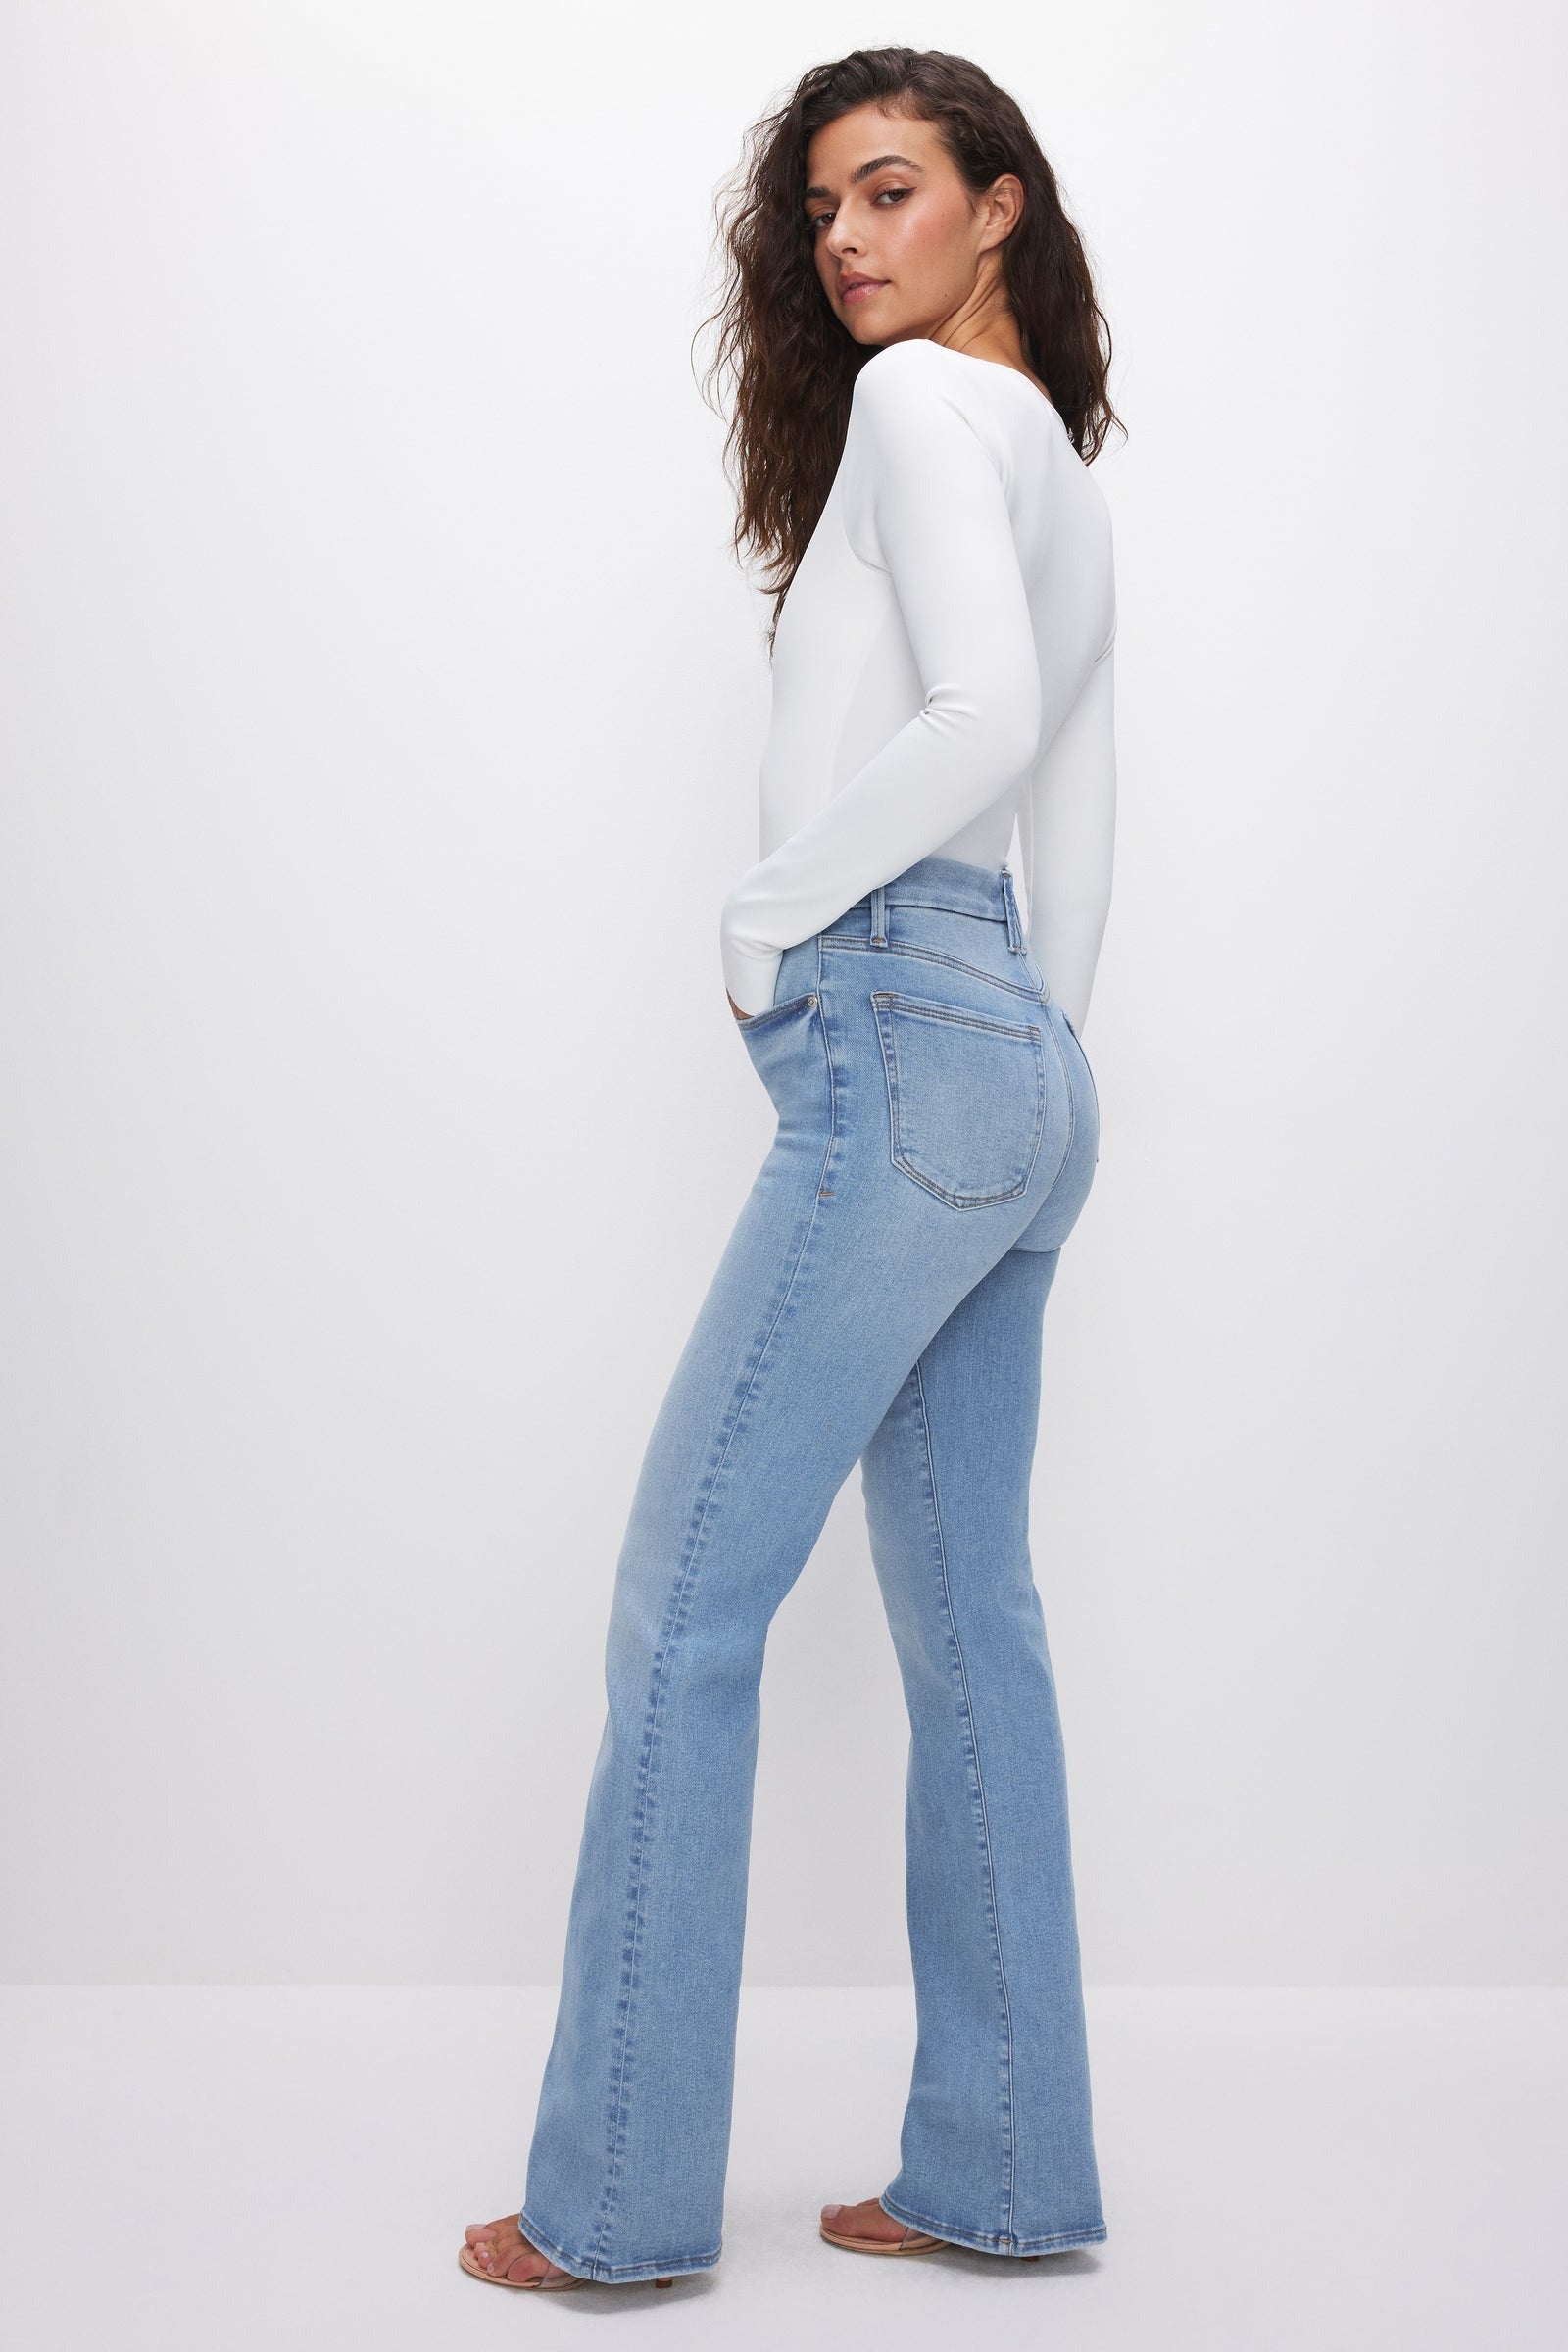 31 Pairs Of Jeans (That Aren't Skinny) To Try